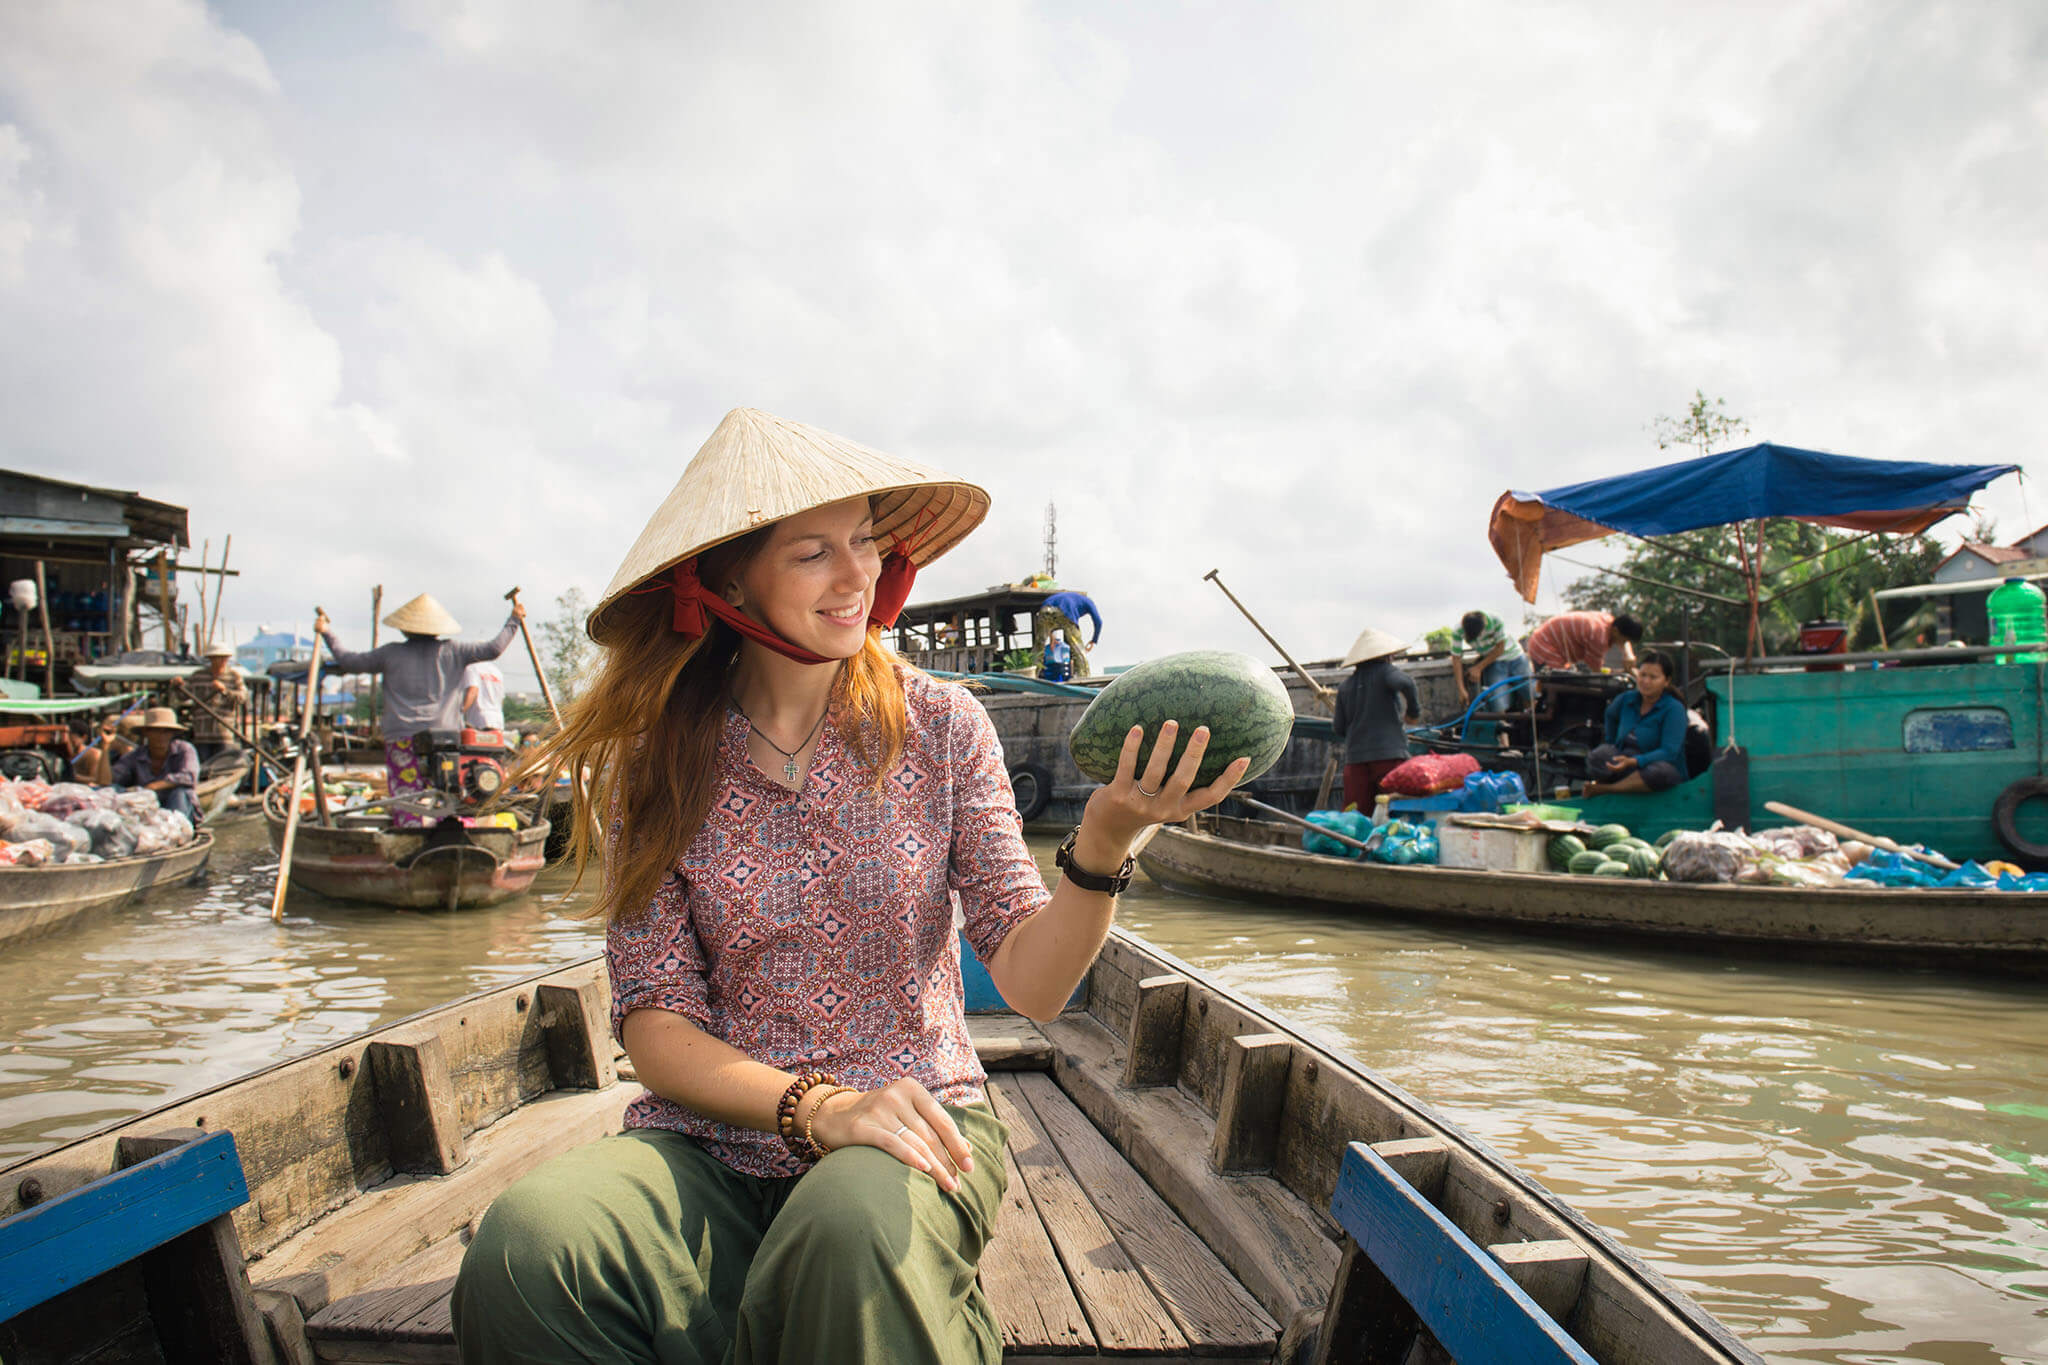 Cai Rang floating market, Can Tho, Vietnam © ShutterStock 416948800 by Dmytro Gilitukha